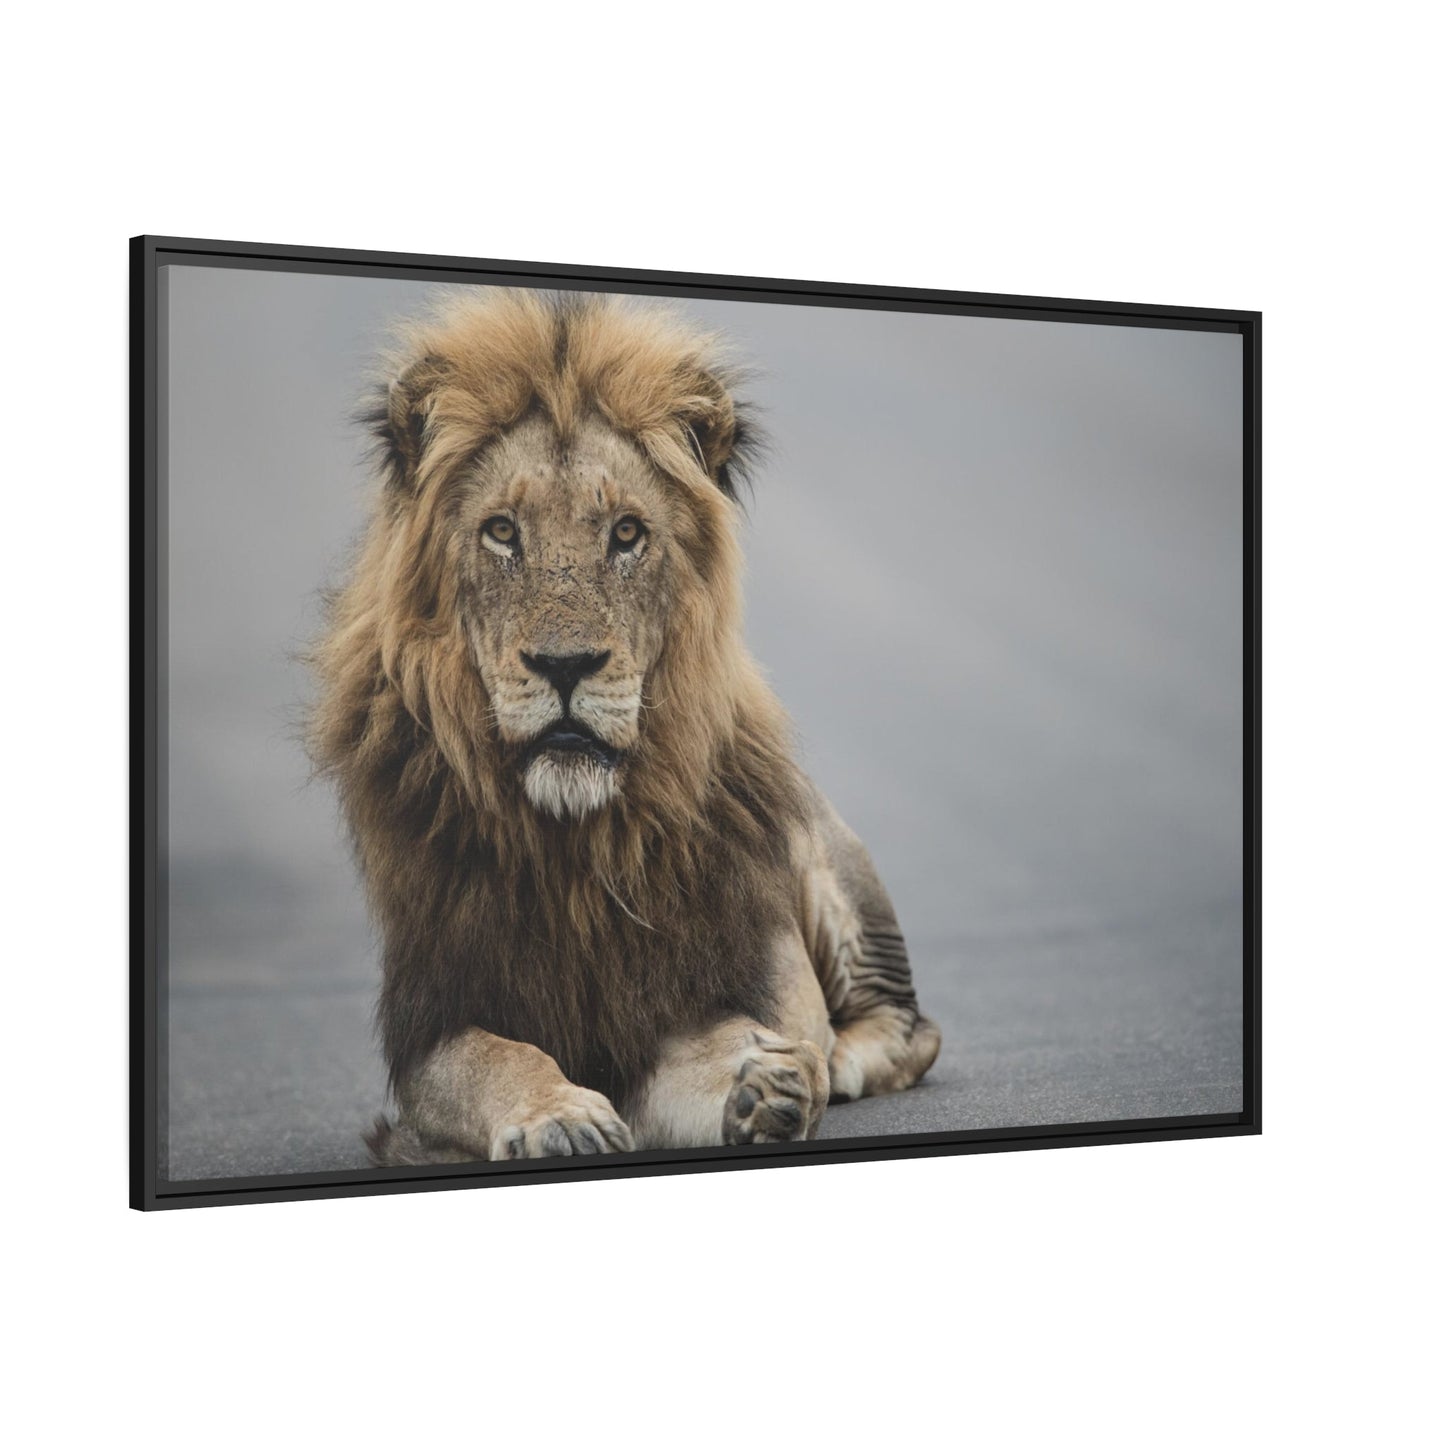 The Mighty Lion: Natural Canvas Print of the African Predator